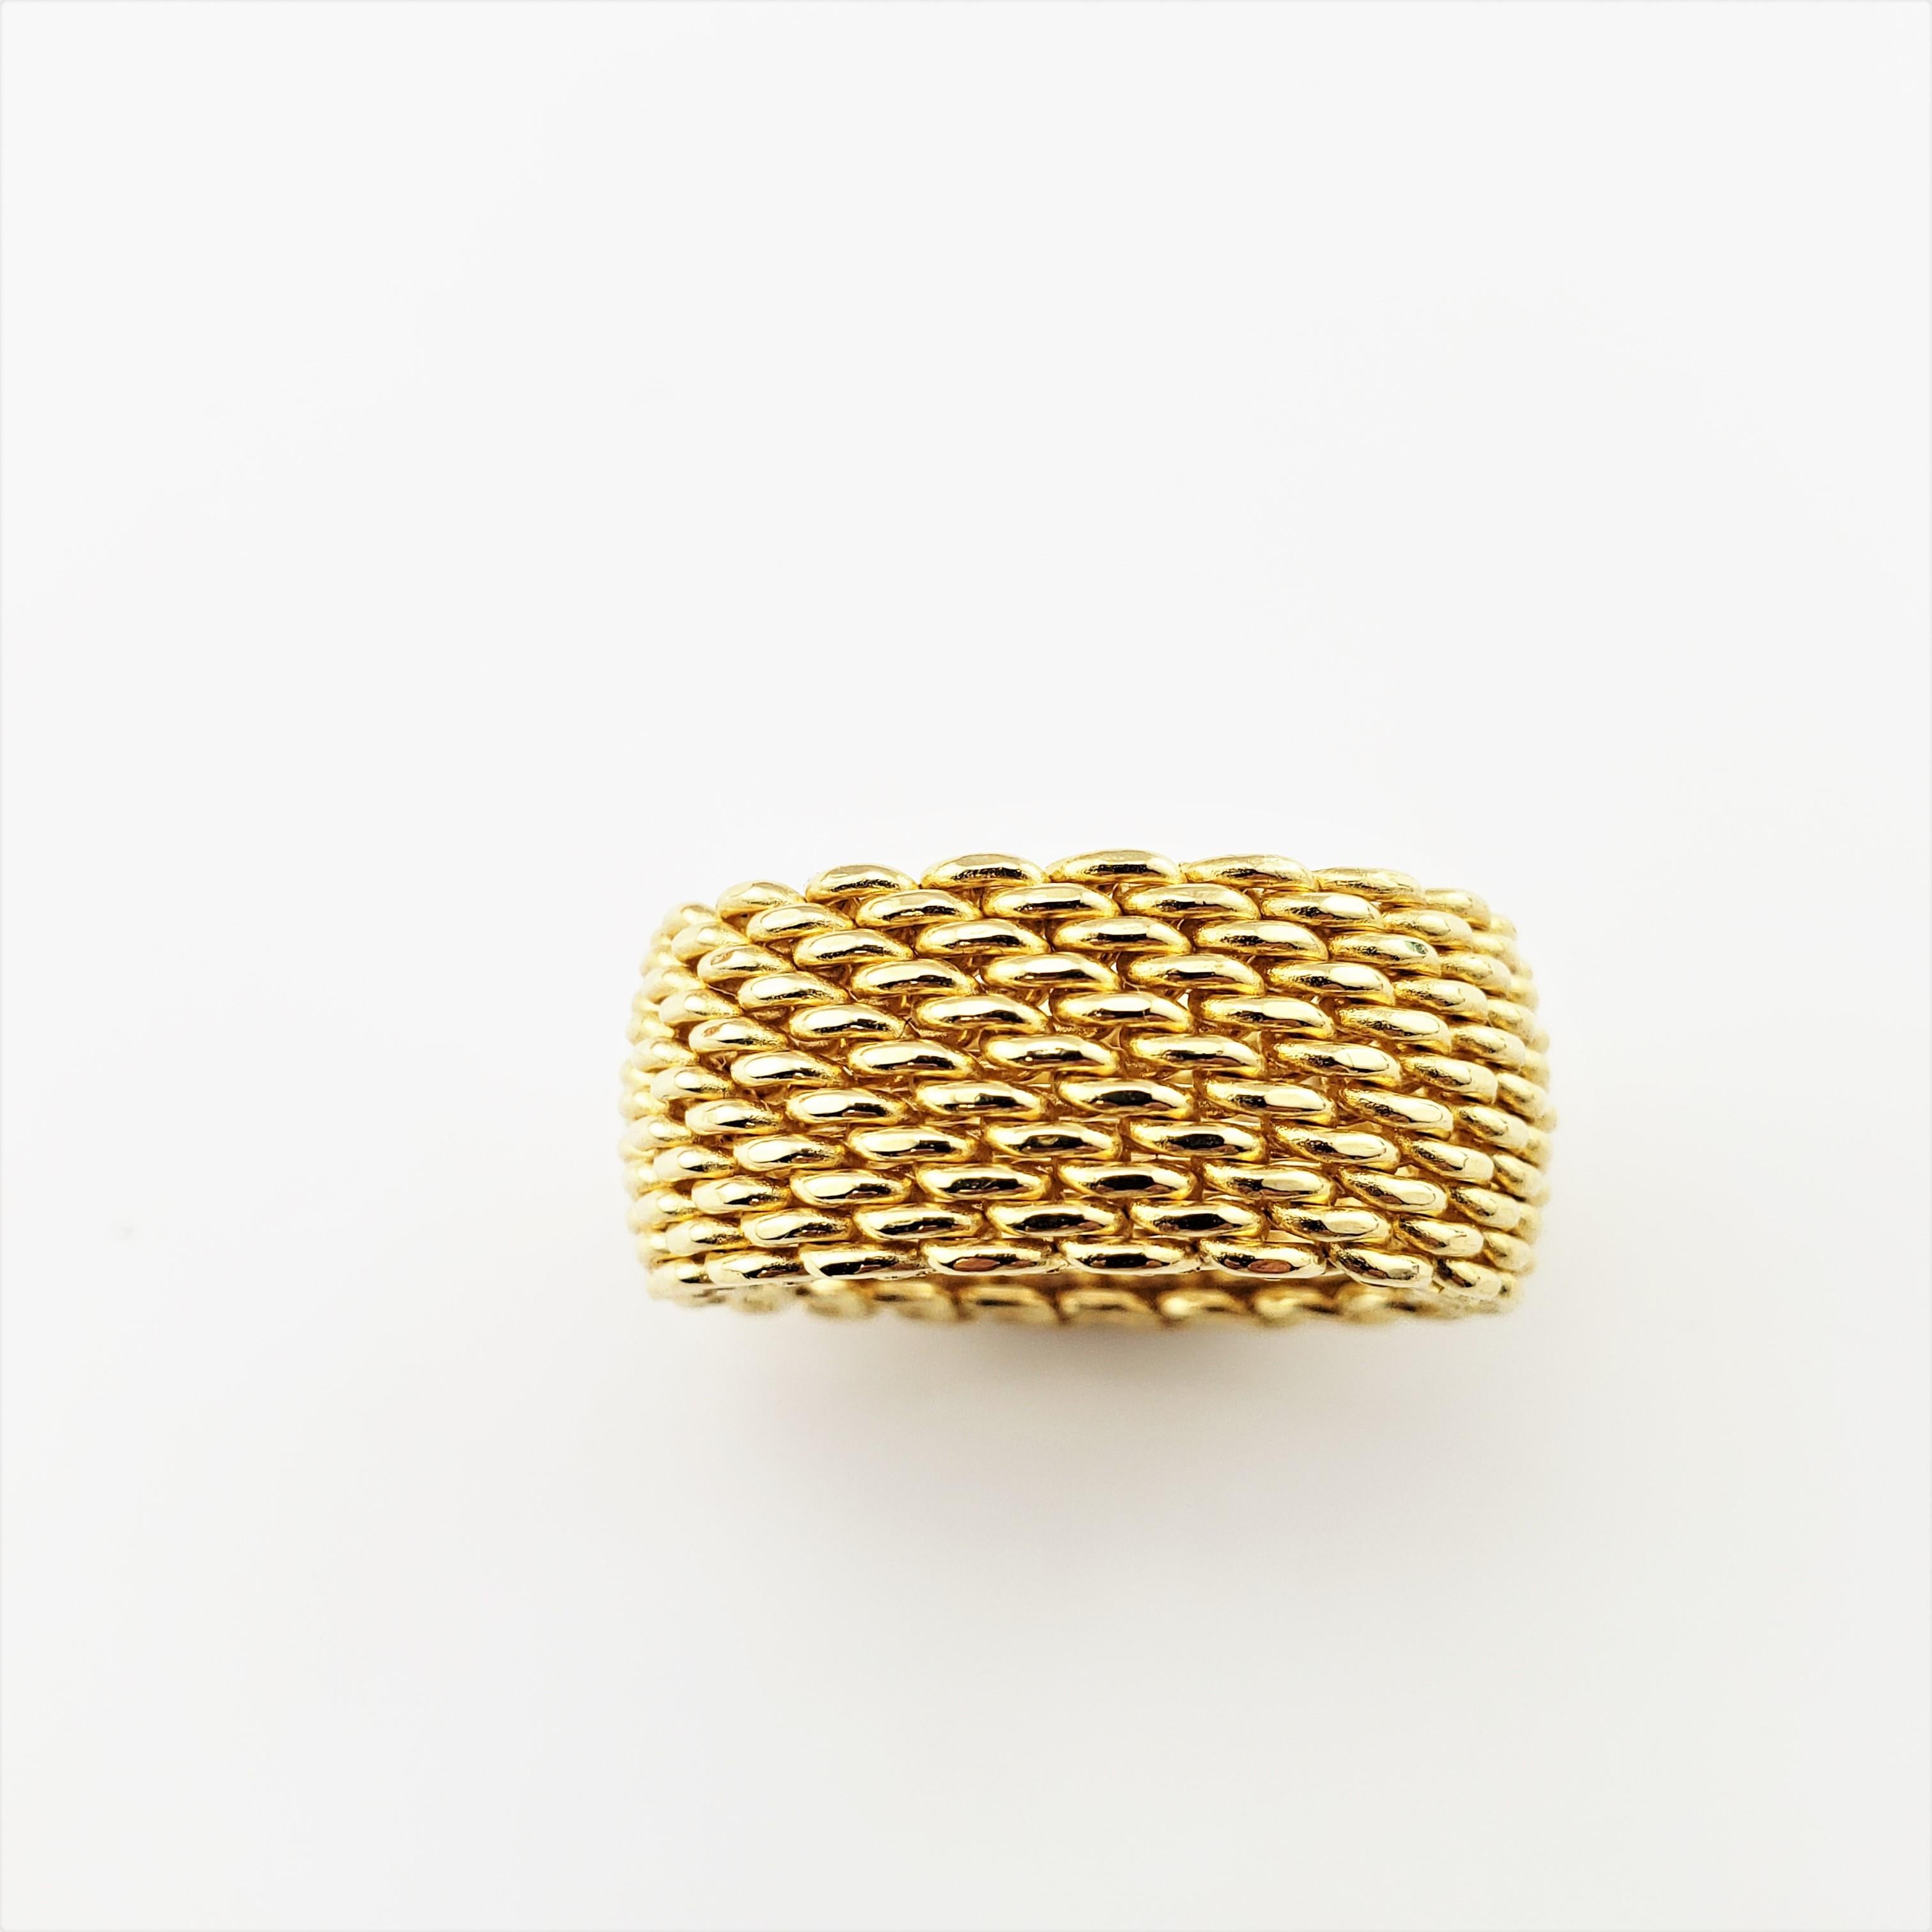 Vintage Tiffany & Co. 18 Karat Yellow Gold Mesh Band Ring Size 6-

This stunning mesh band is crafted in beautifully detailed 18K yellow gold by Tiffany & Co. Width: 10 mm. Original Tiffany & Co. pouch included.

Ring Size: 6

Weight: 8.5 dwt. /